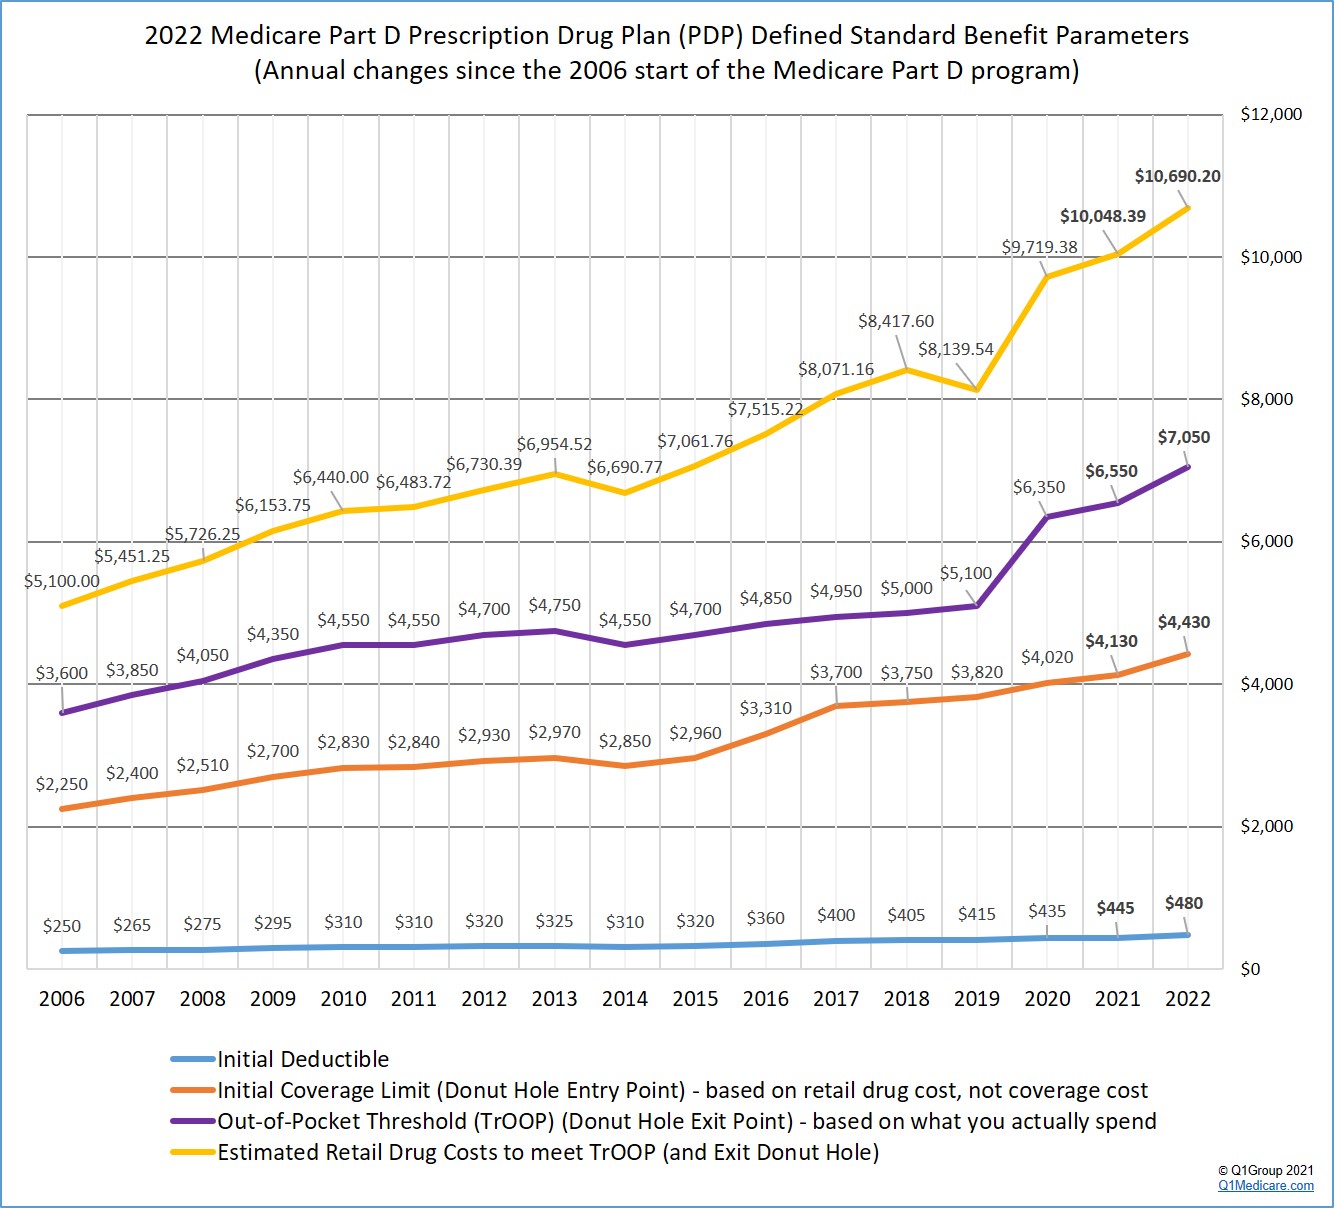 2022 Preliminary Medicare Part D defined standard benefit parameters -- annual changes since 2006